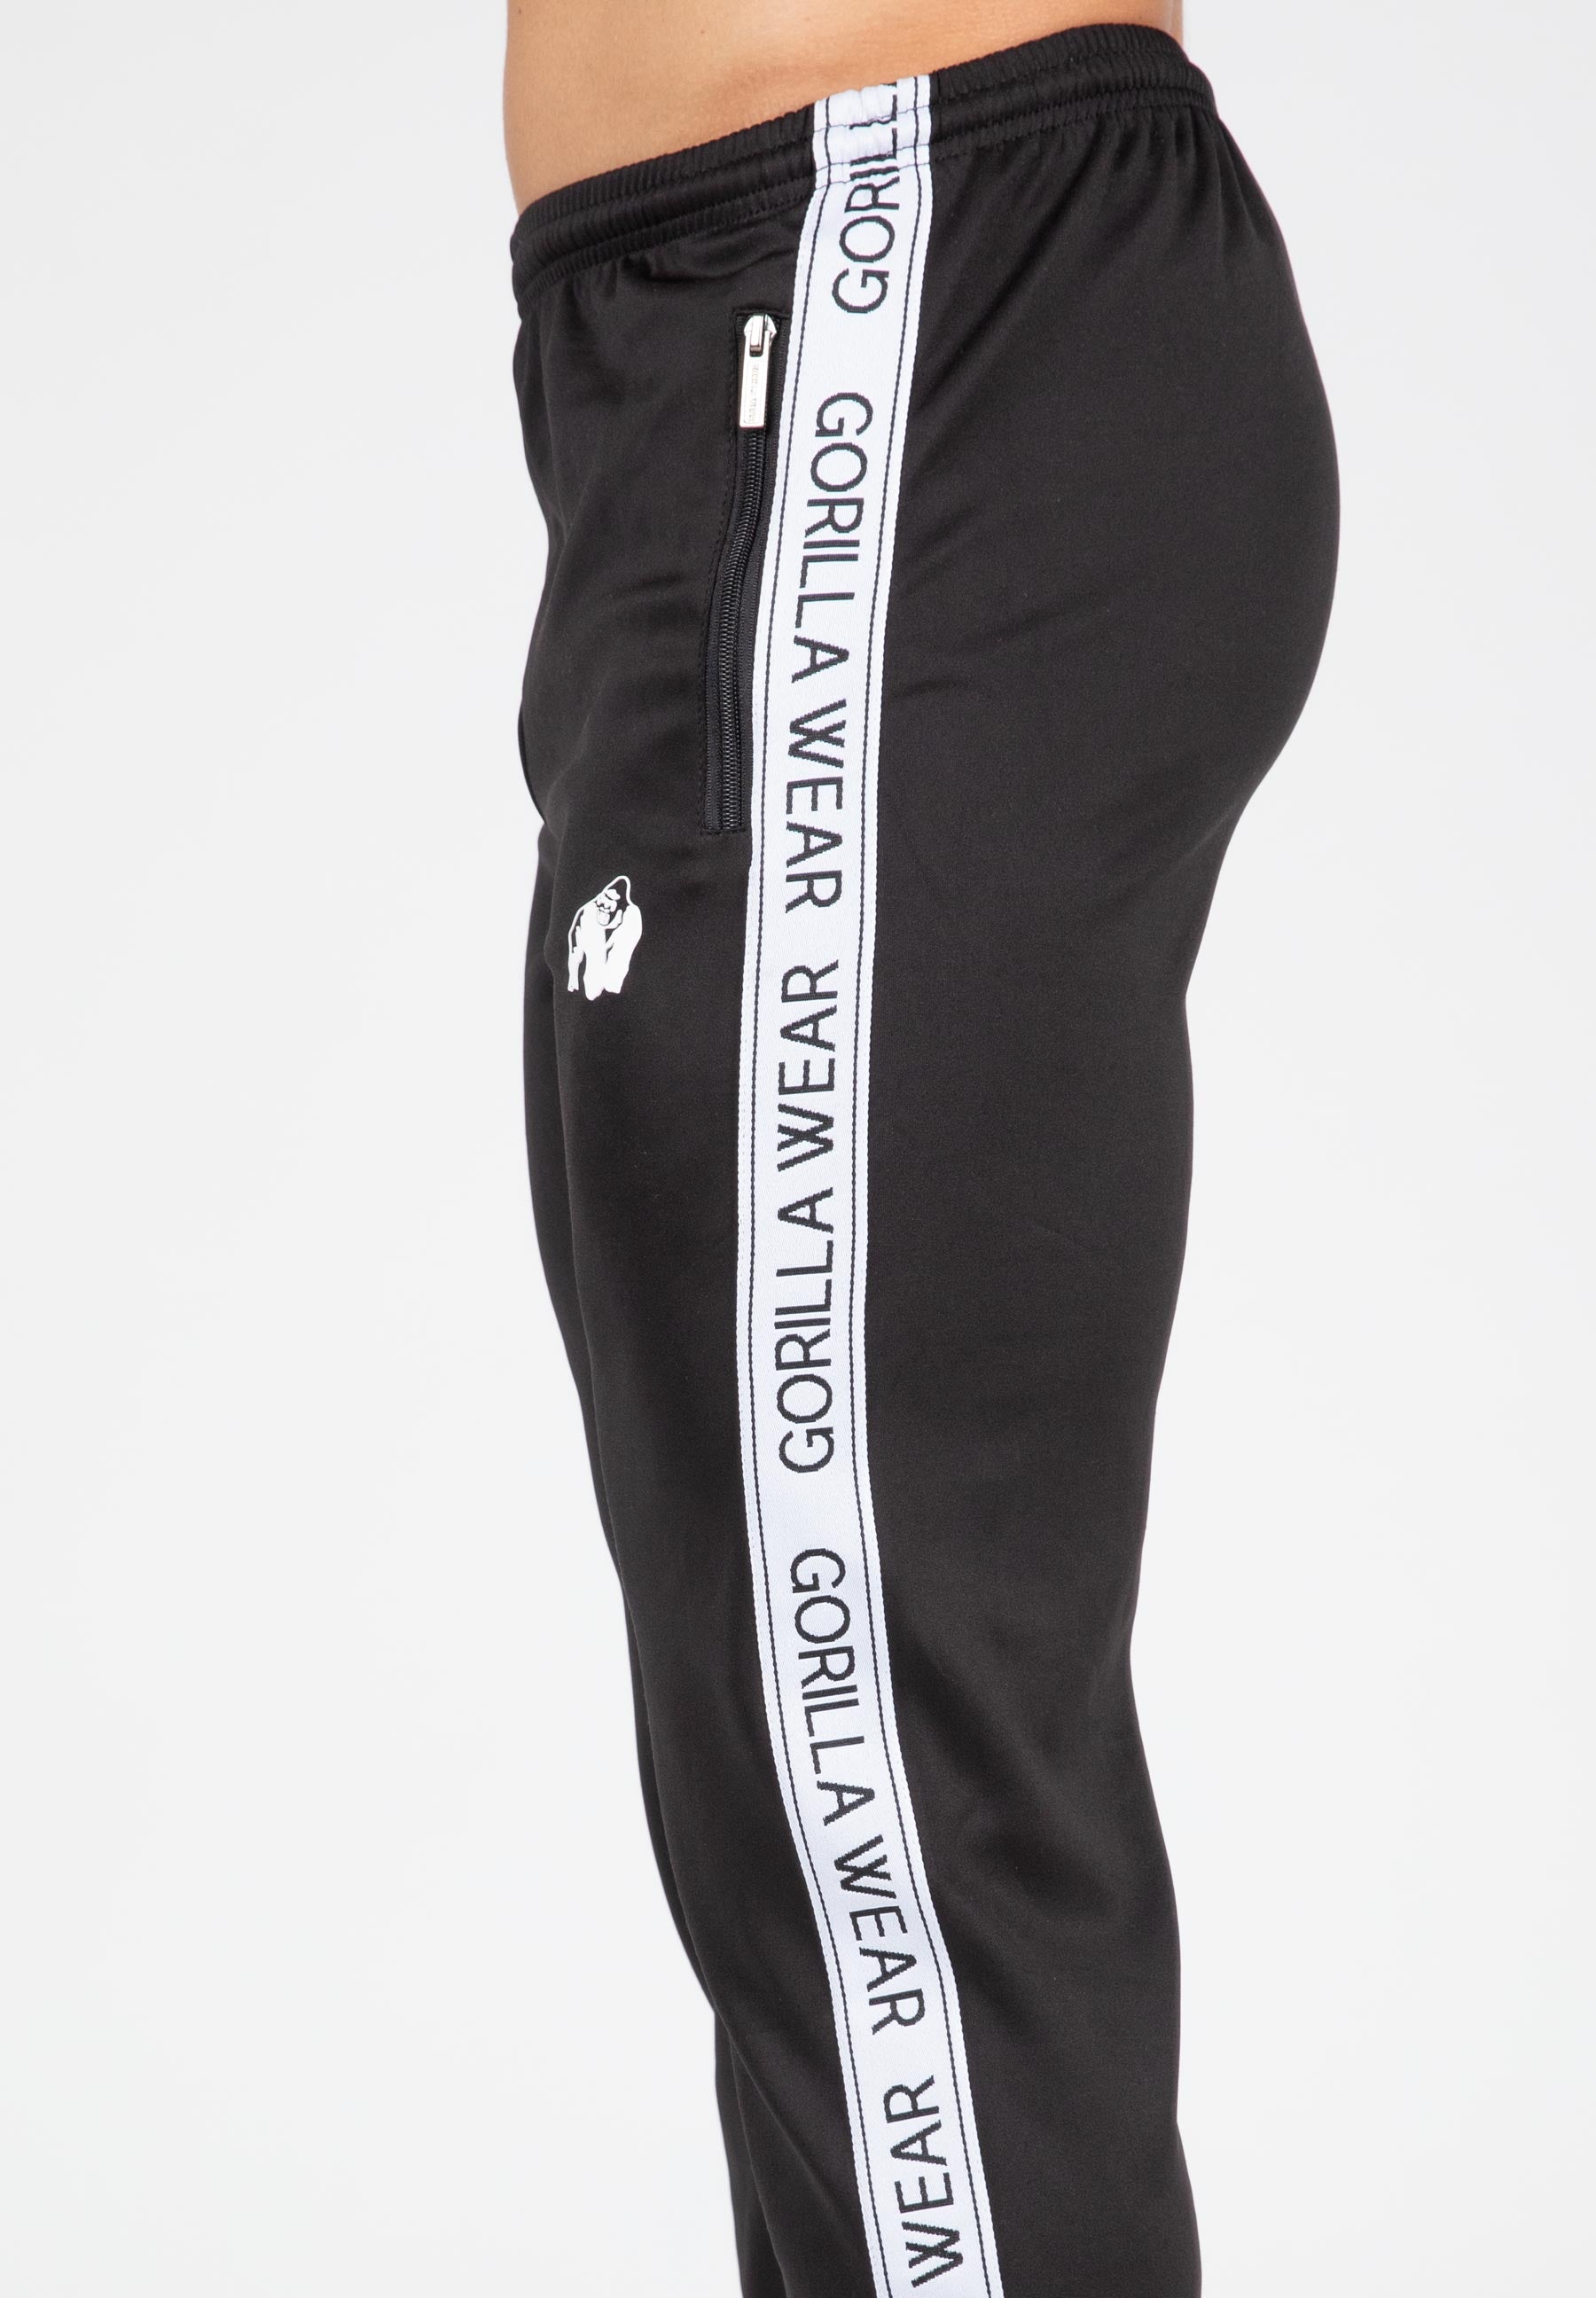  Sweatpants - Activewear: Clothing, Shoes & Accessories